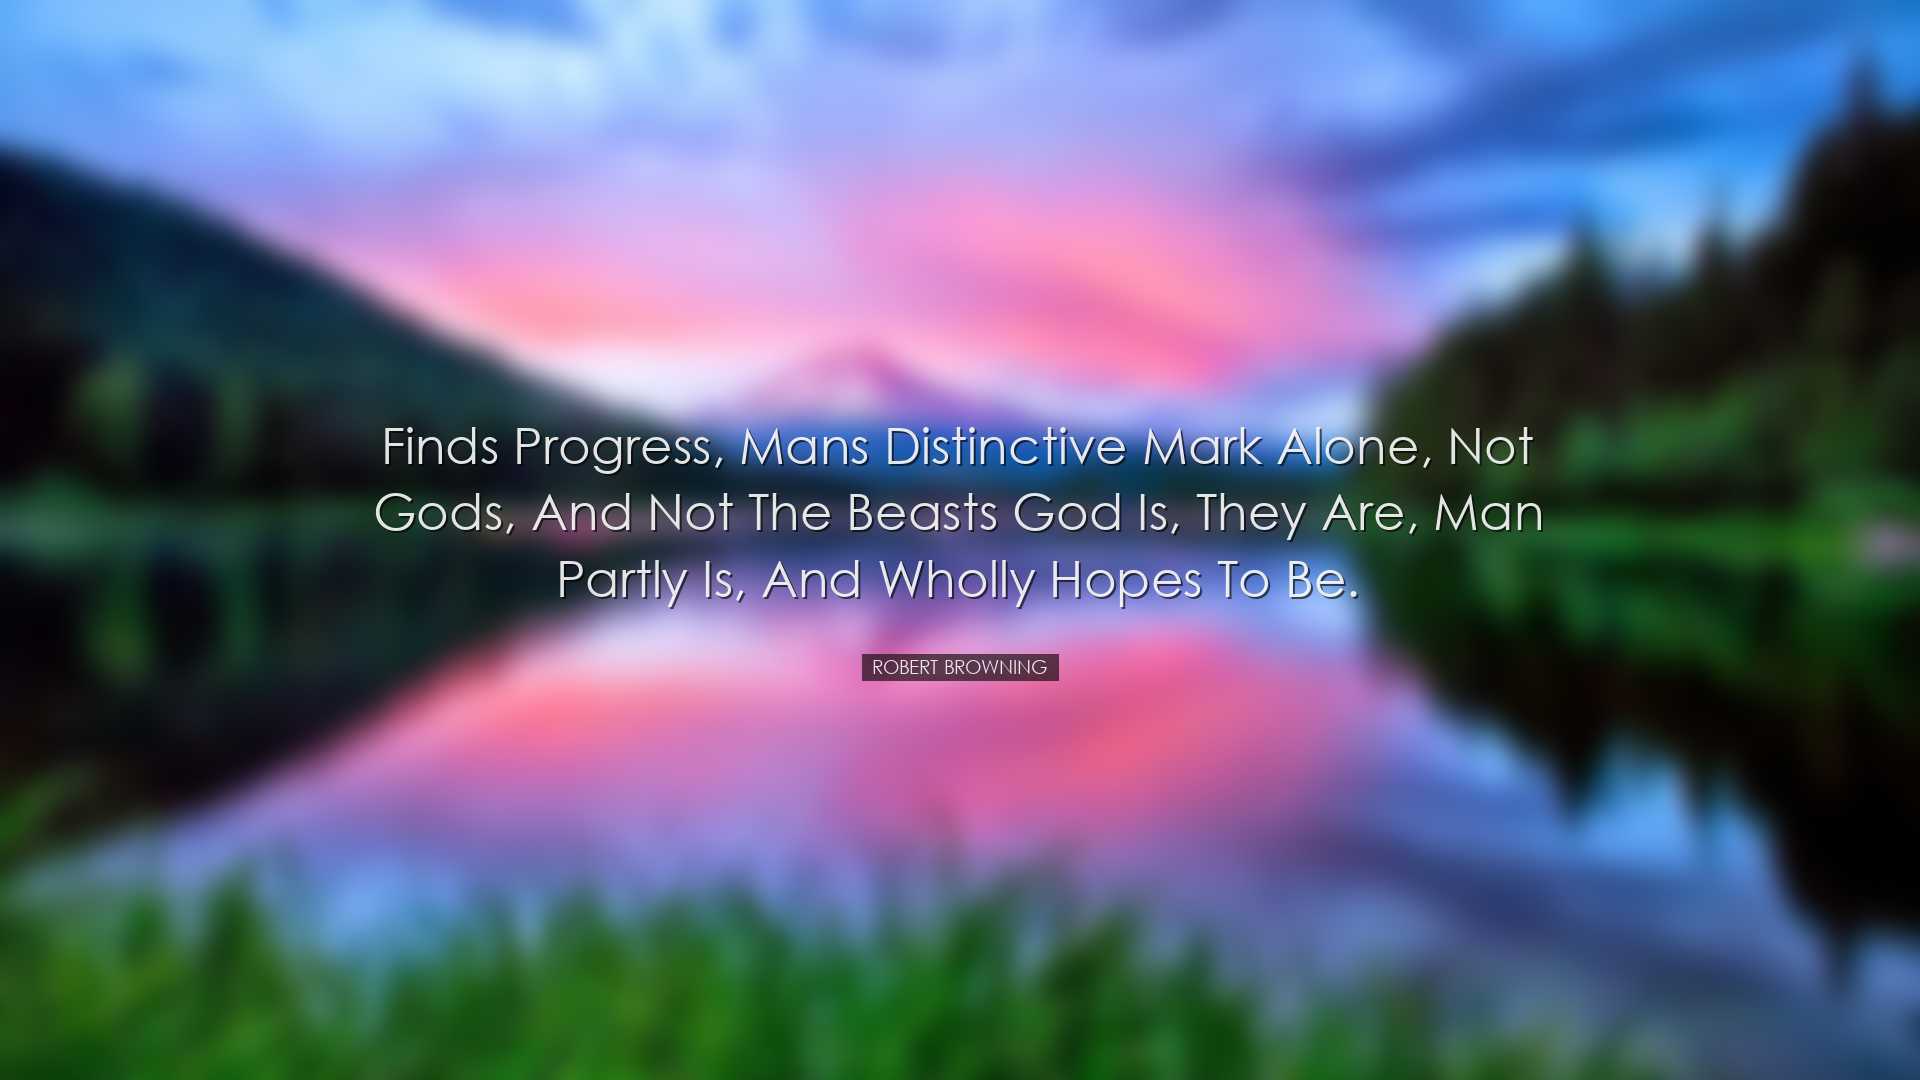 Finds progress, mans distinctive mark alone, Not Gods, and not the